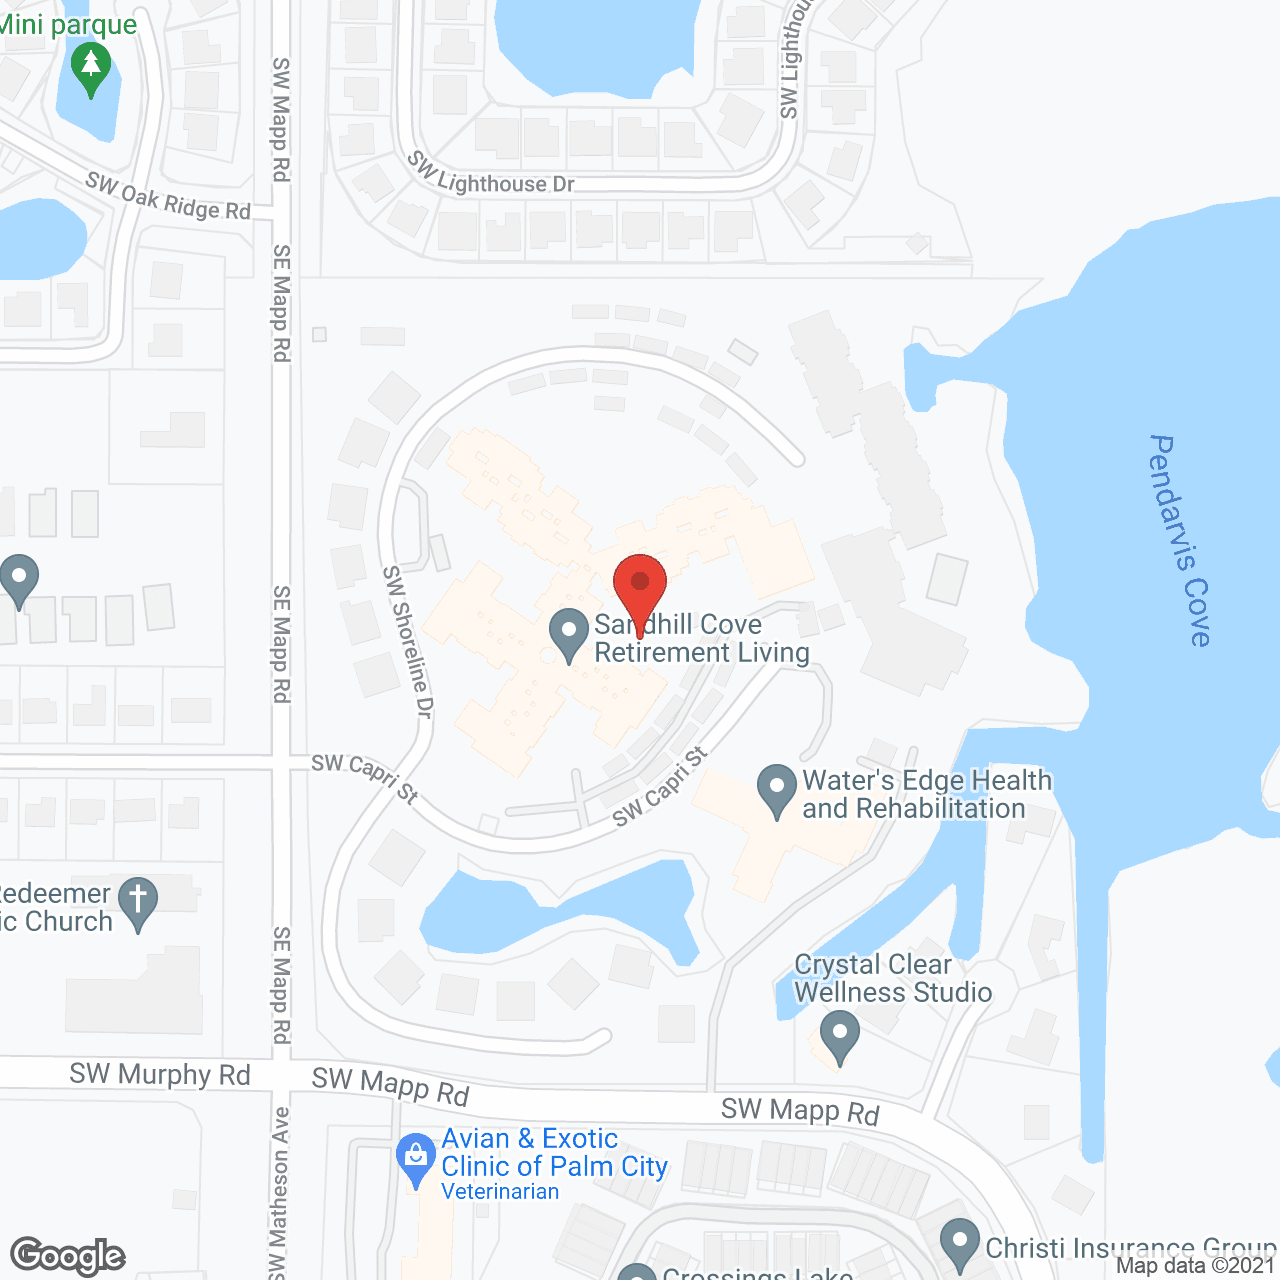 Sand Hill Cove Retirement Living in google map